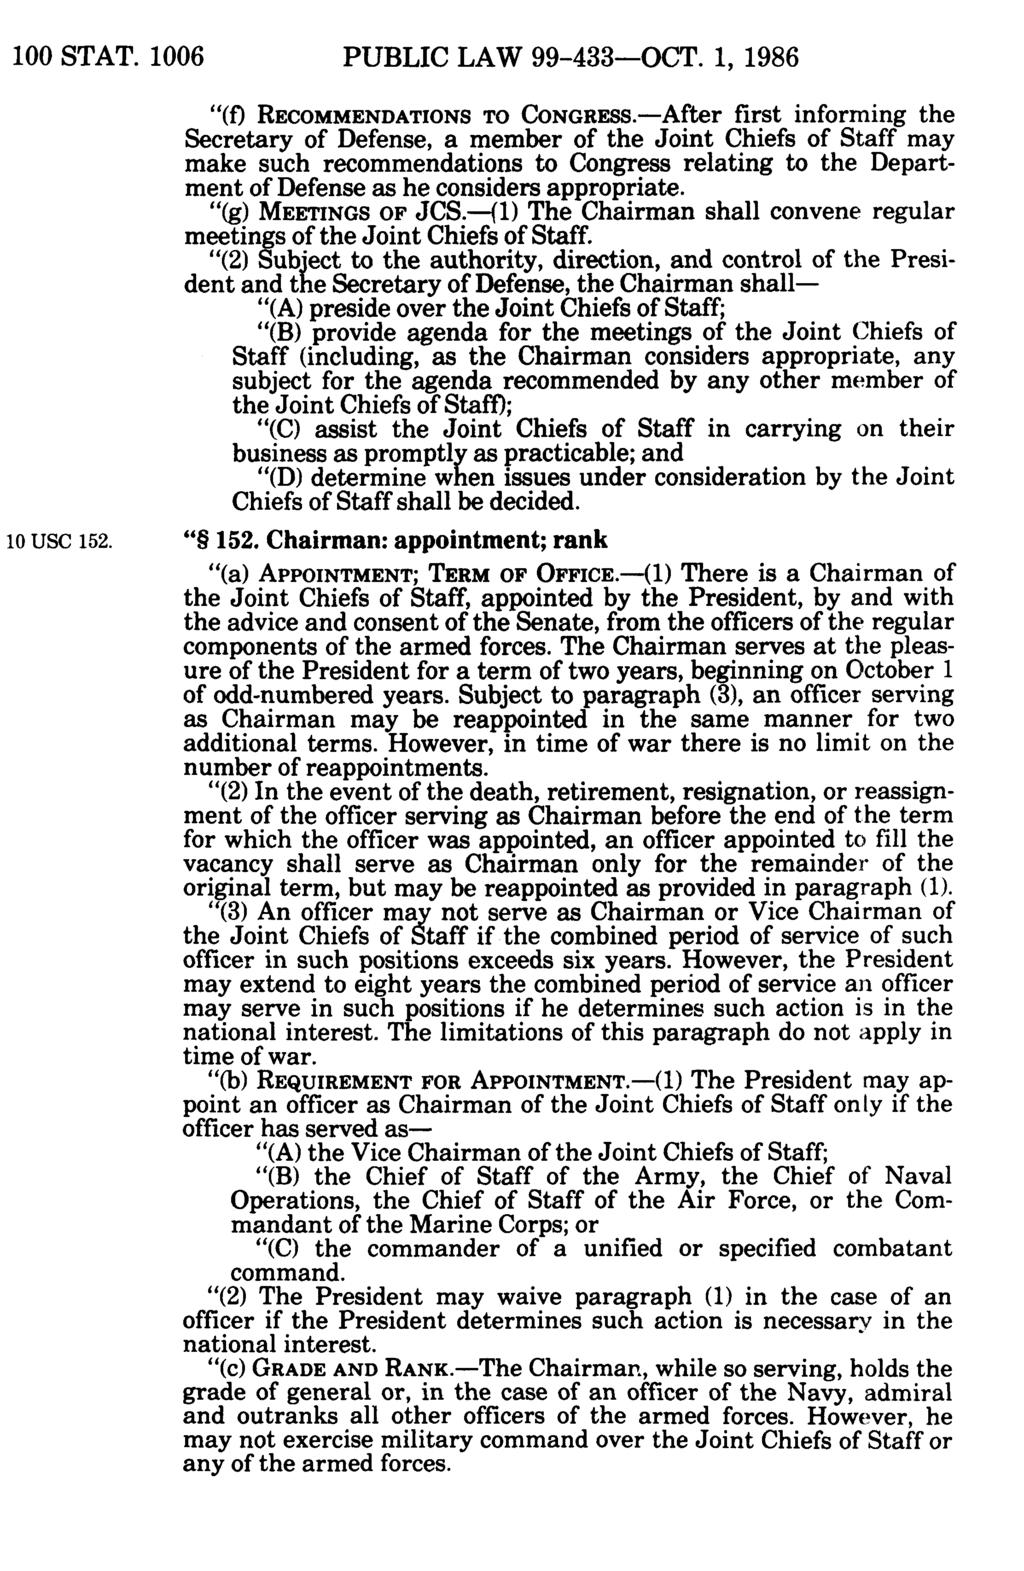 100 STAT. 1006 PUBLIC LAW 99-433-OCT. 1, 1986 10 USC 152. (f) RECOMMENDATIONS TO CONGRESS.